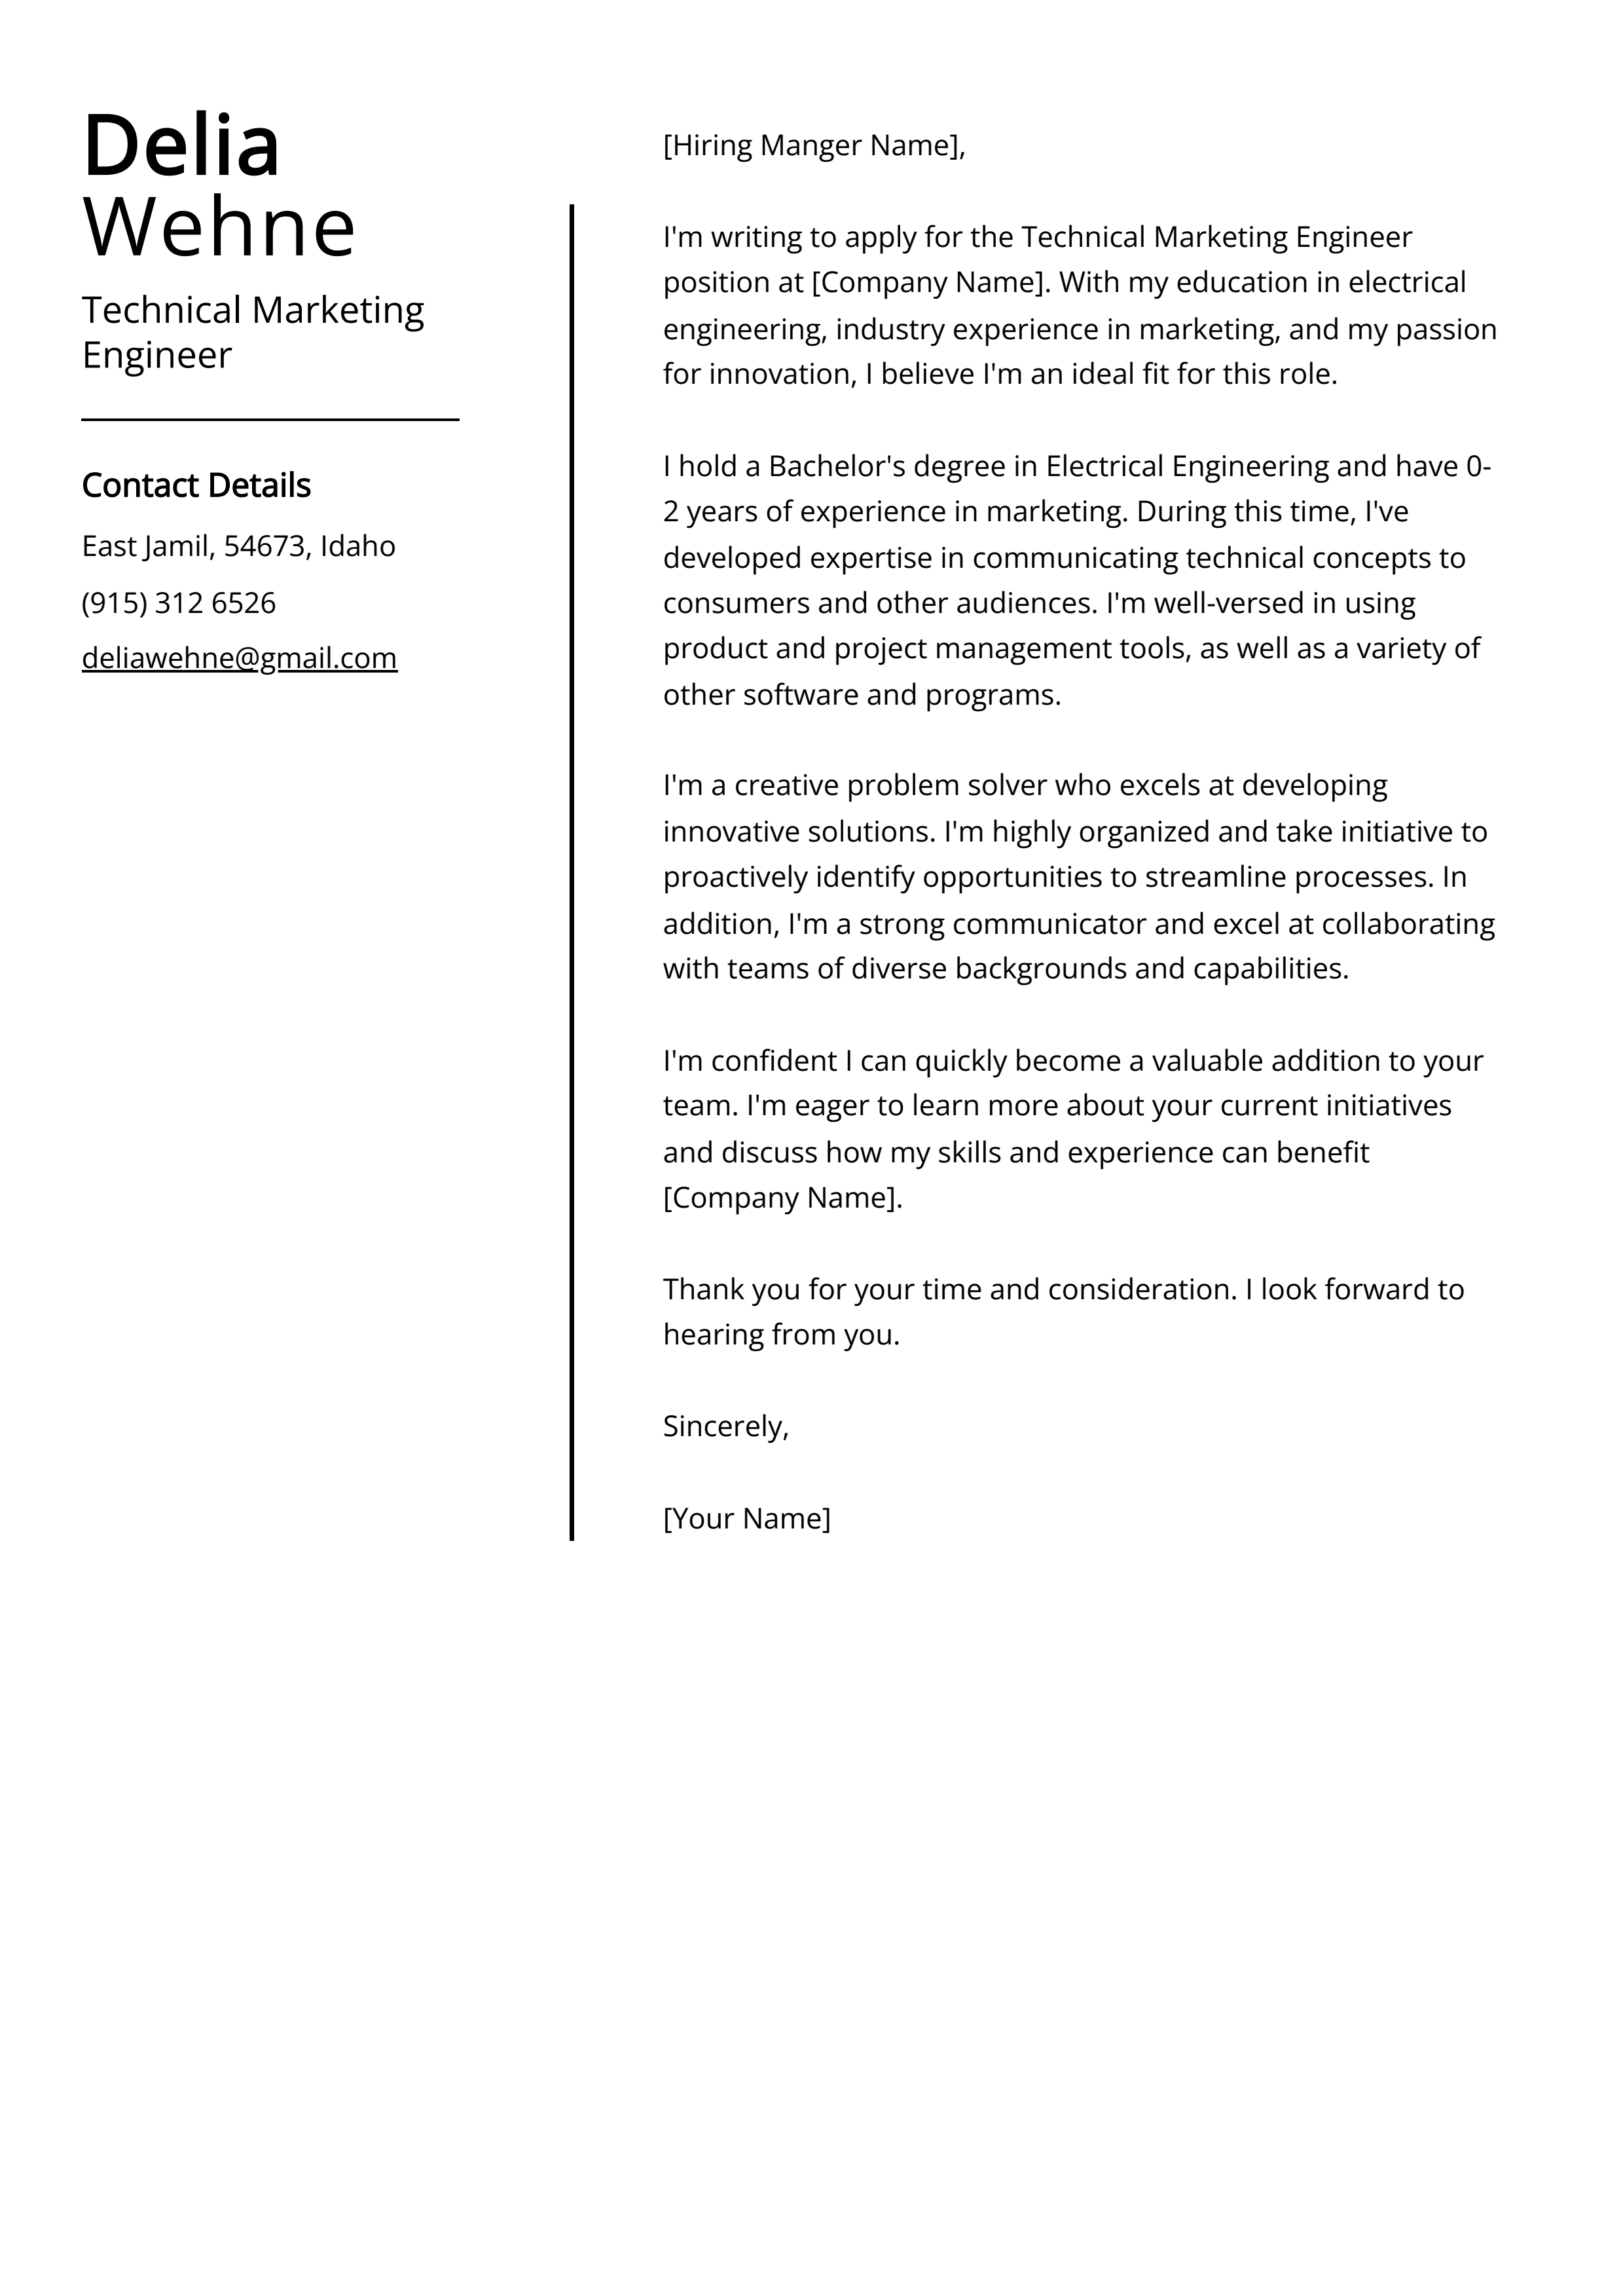 Technical Marketing Engineer Cover Letter Example